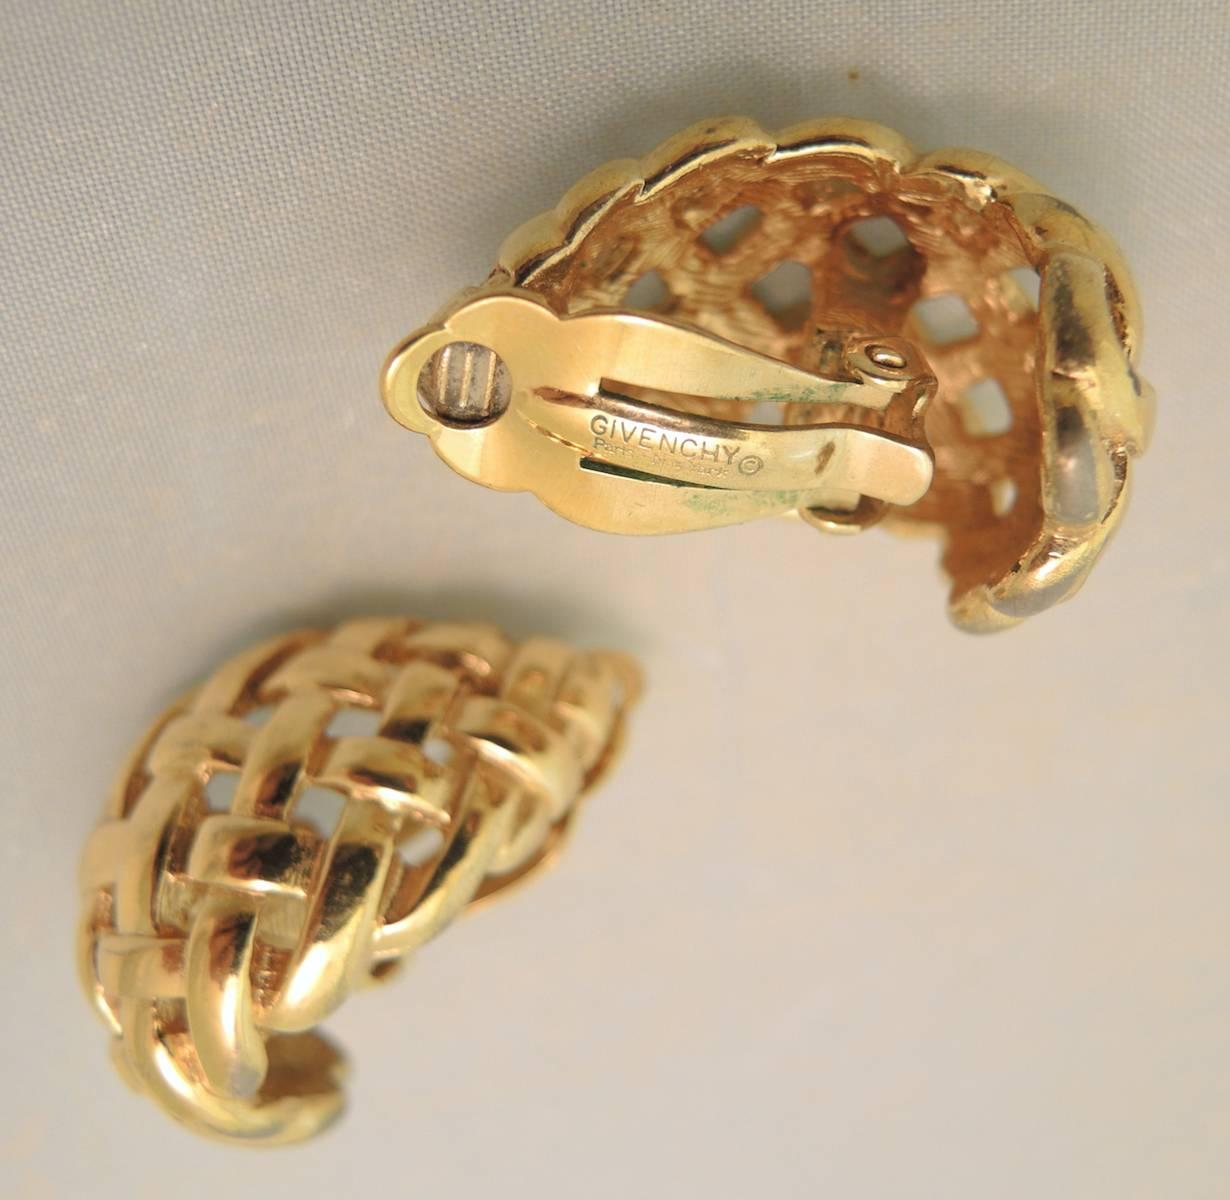 These vintage signed Givenchy earrings feature a shrimp shape, basket weave design in a gold tone setting.  These clip earrings measure 1-1/8” x 3/4” and are signed “Givenchy”.  They are in excellent condition.